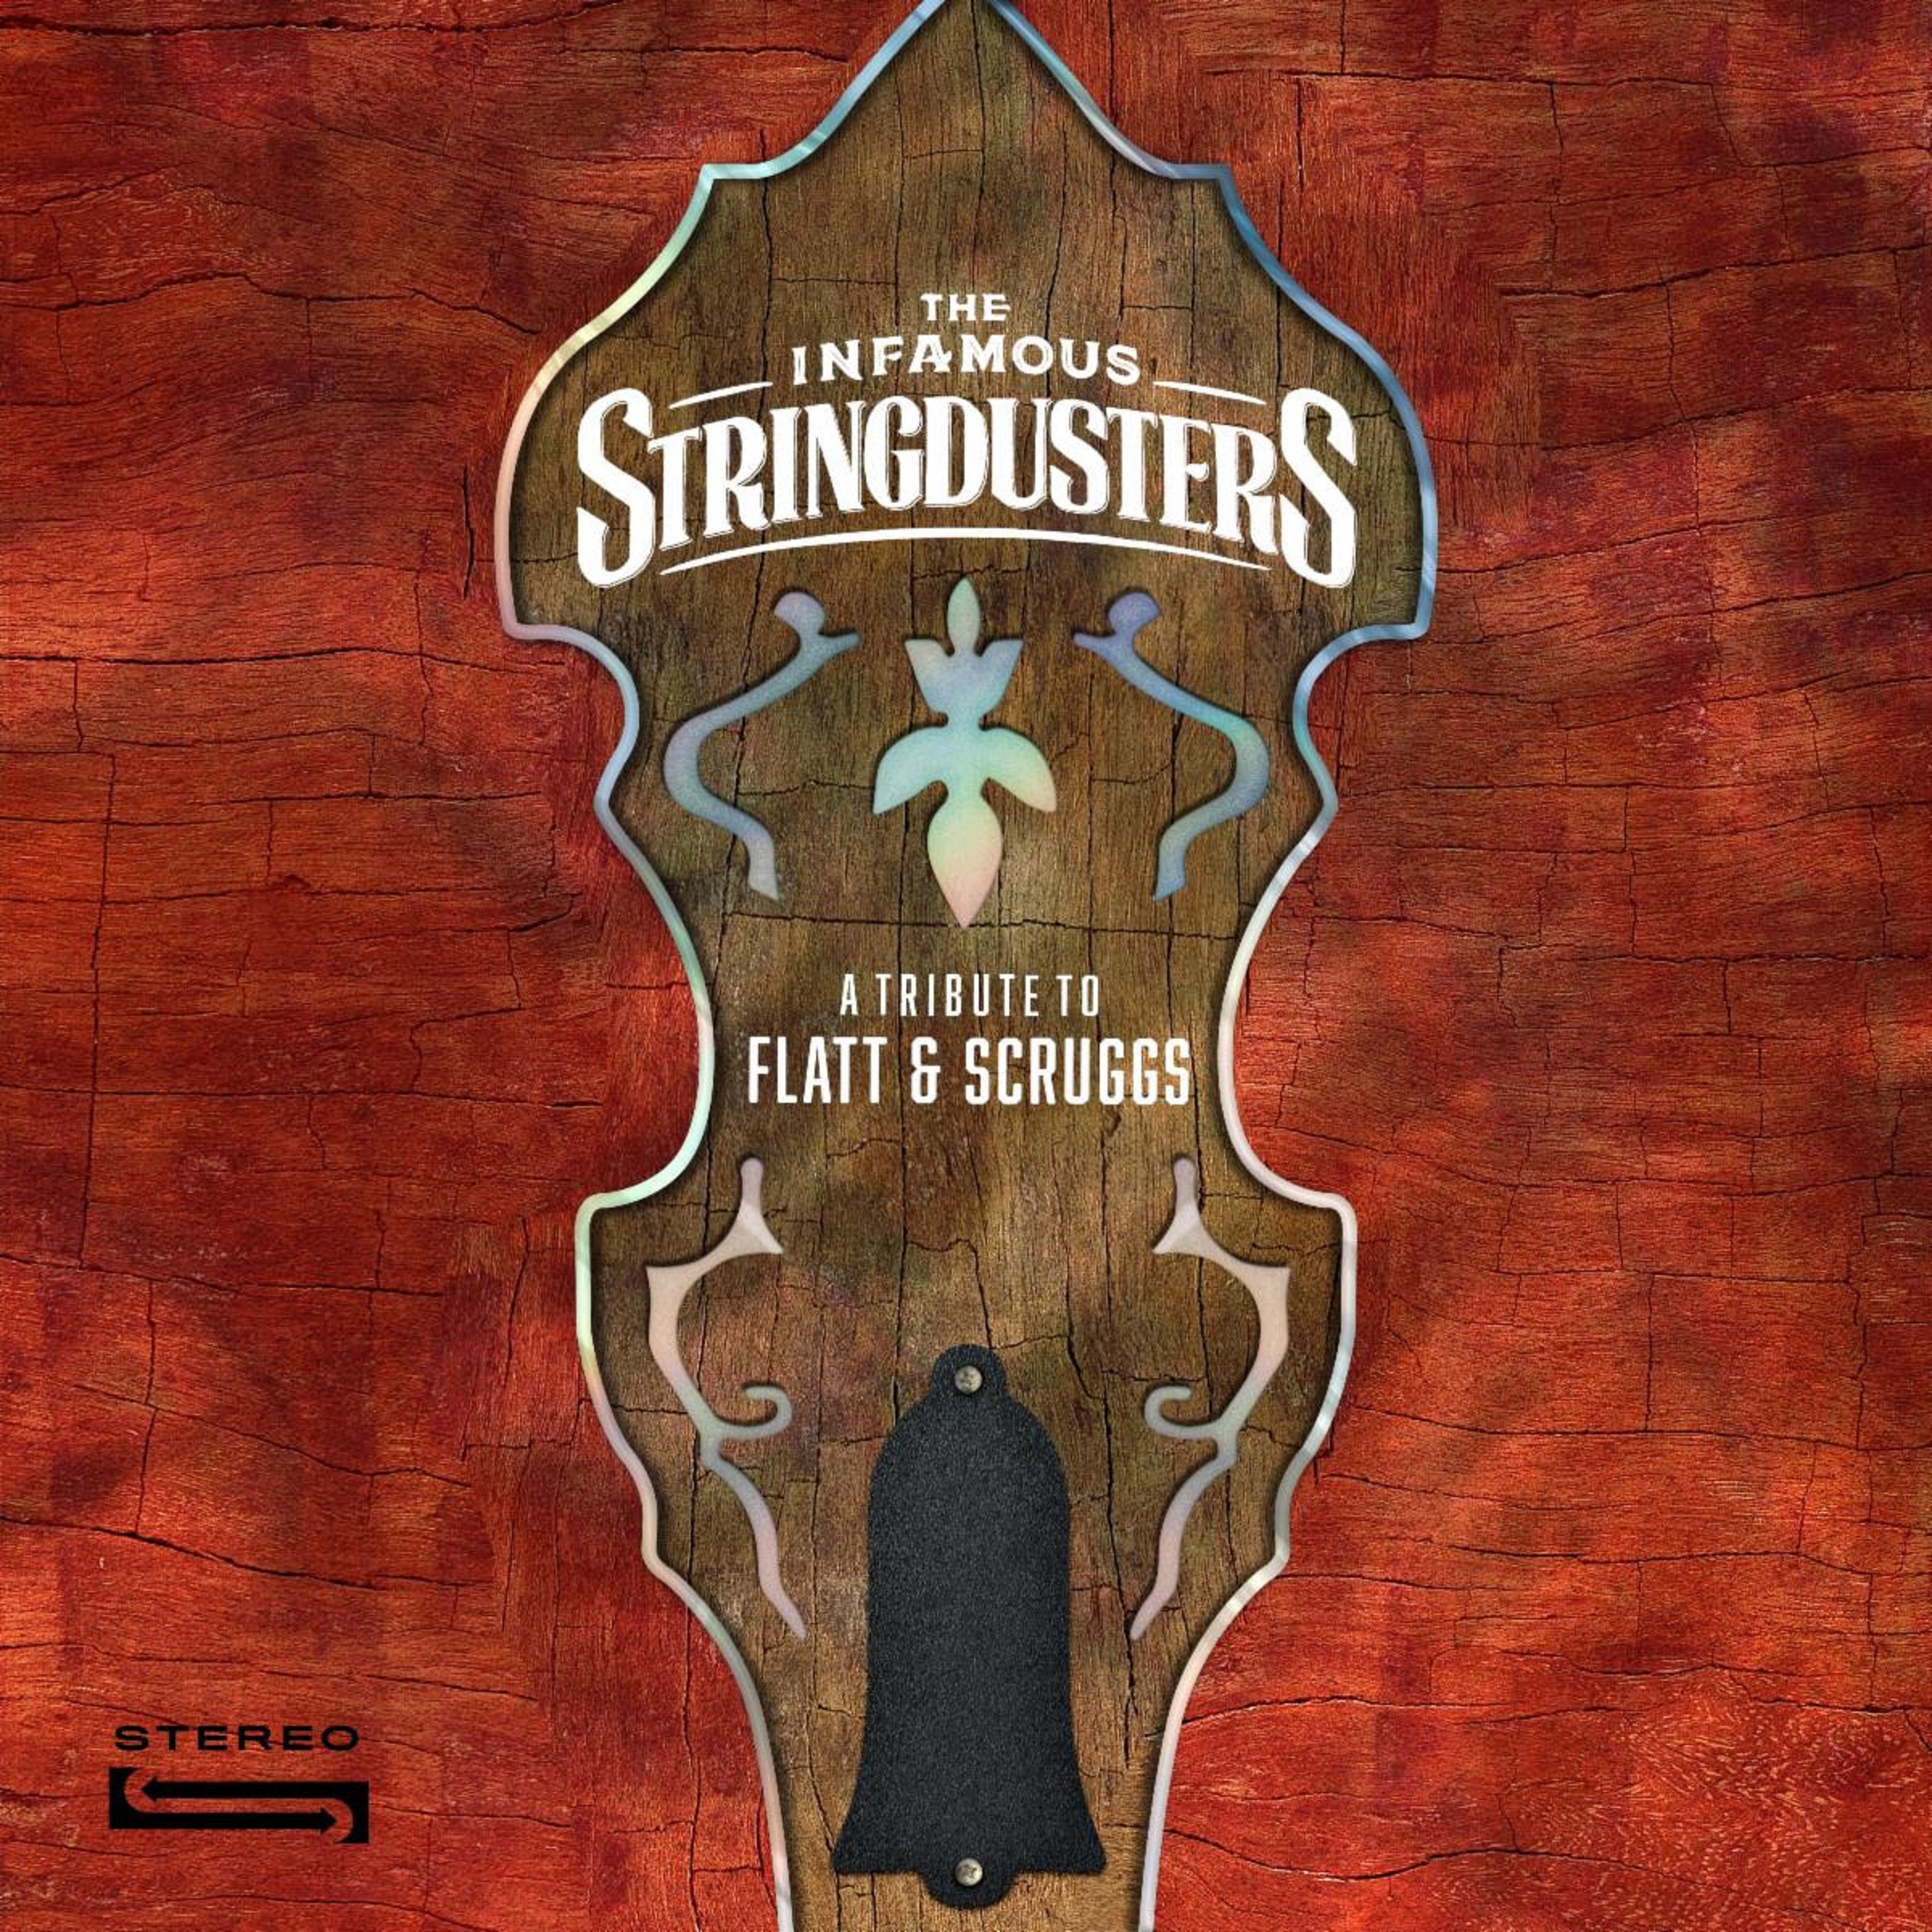 The Infamous Stringdusters Are Back With Another Tribute To Bluegrass Greats; This Time It’s Lester Flatt And Earl Scruggs